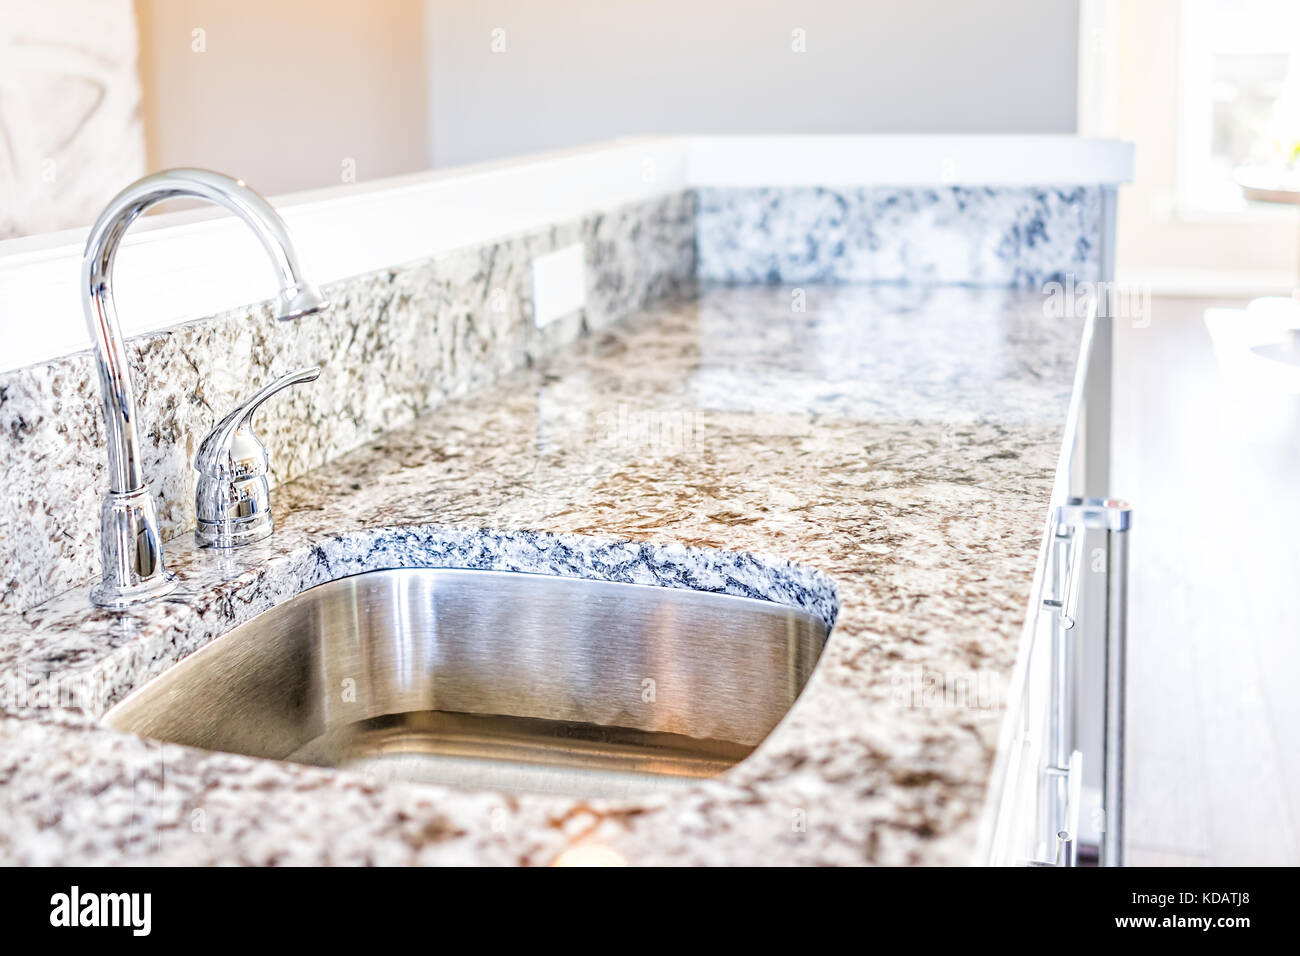 New Modern Faucet And Kitchen Sink Closeup With Granite